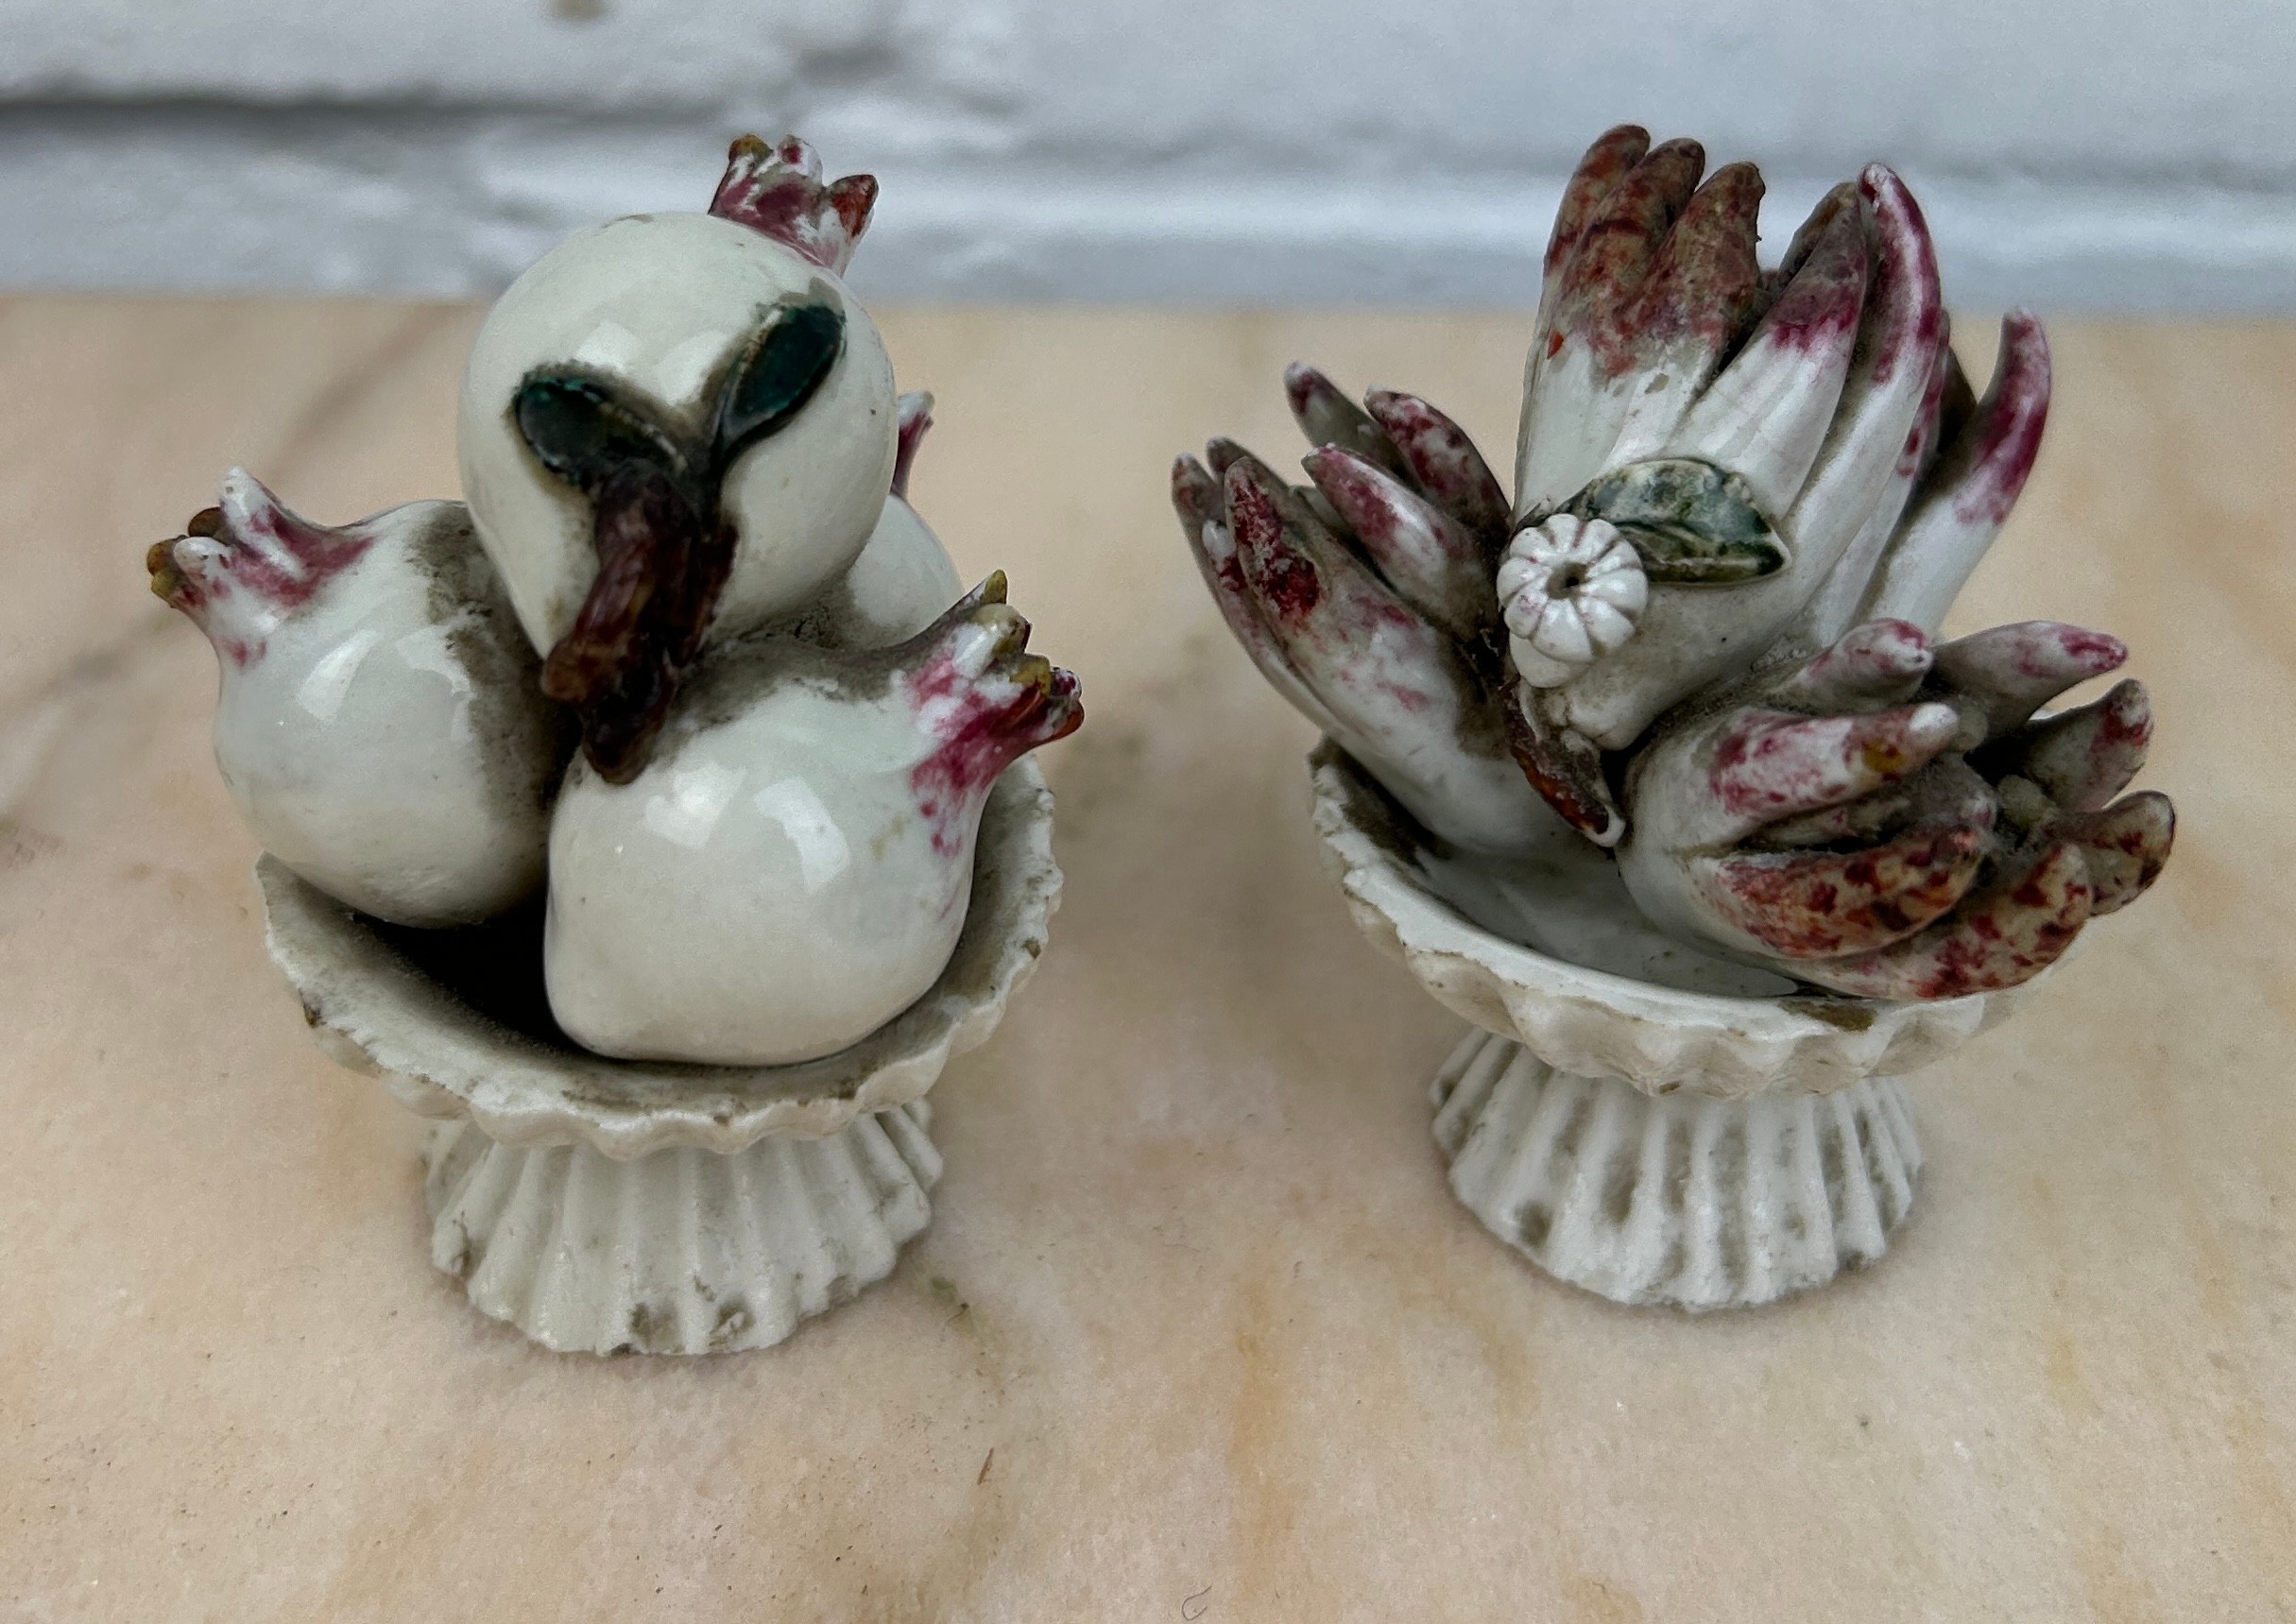 A PAIR OF BIONIC PORCELAIN MADE WITH TRADITIONAL CHINESE THEMES, Chayote, pomegranate, longevity - Image 2 of 3